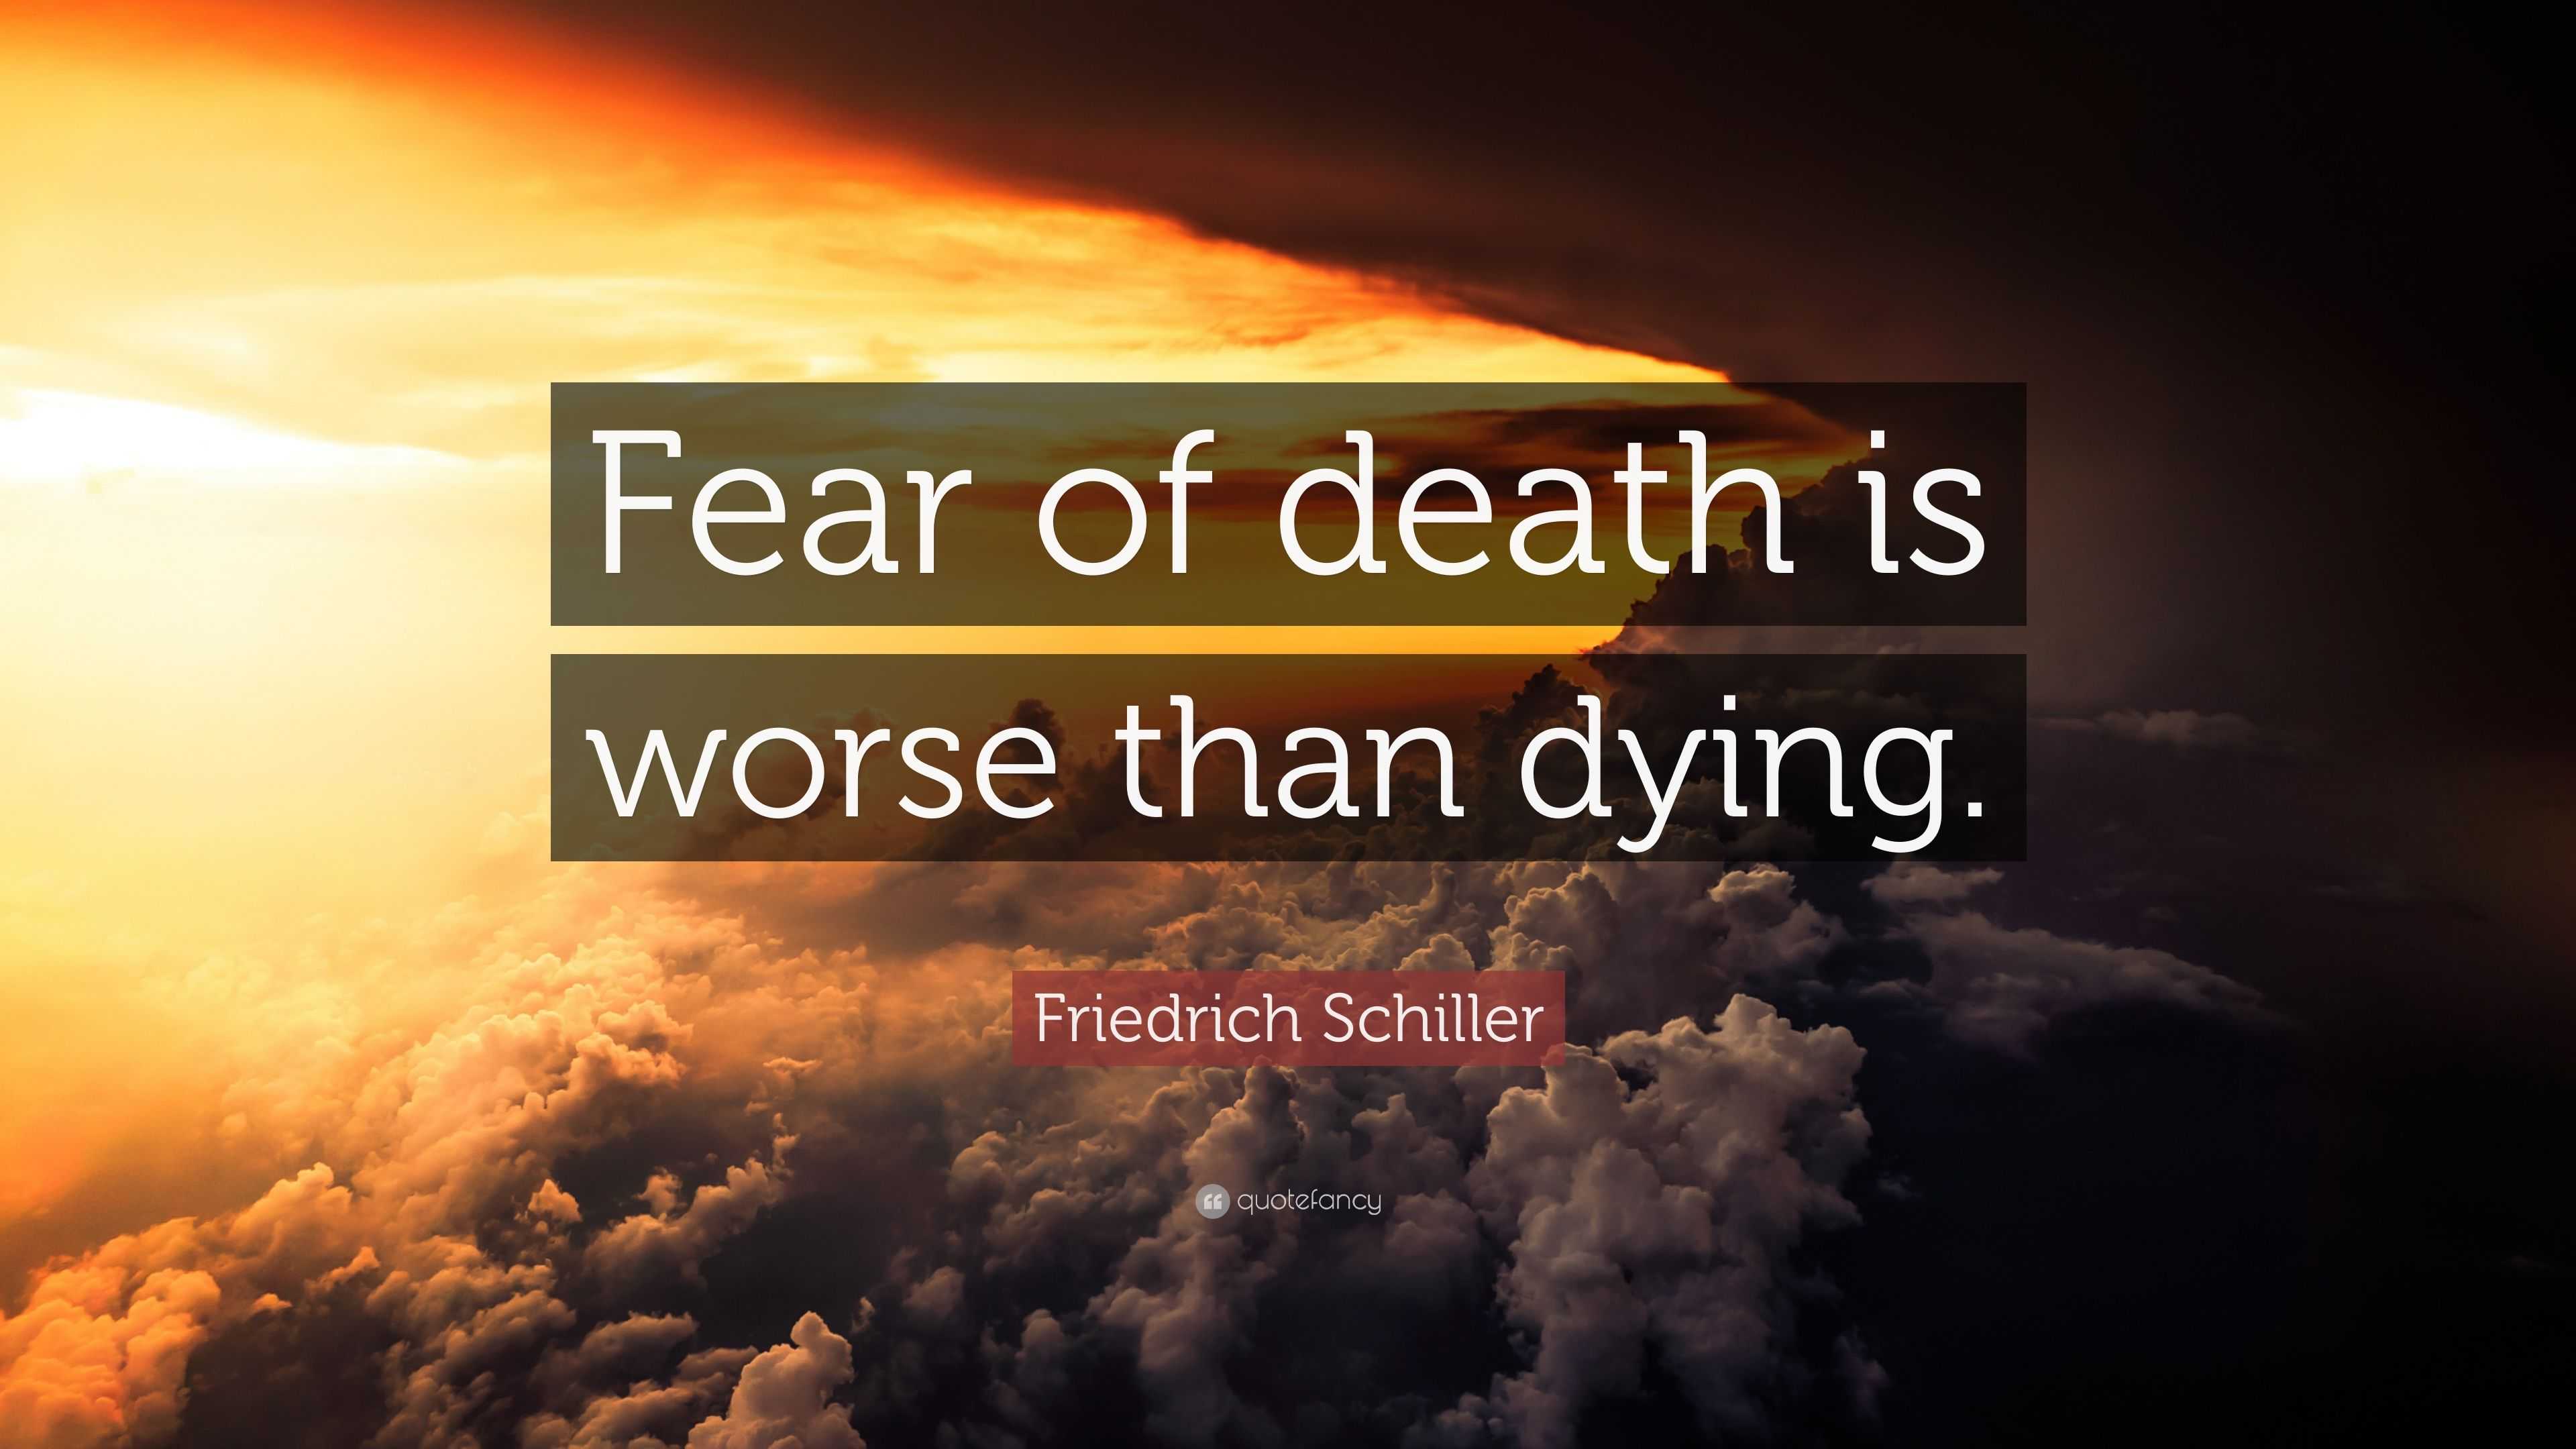 Friedrich Schiller Quote: “Fear of death is worse than dying.” (10